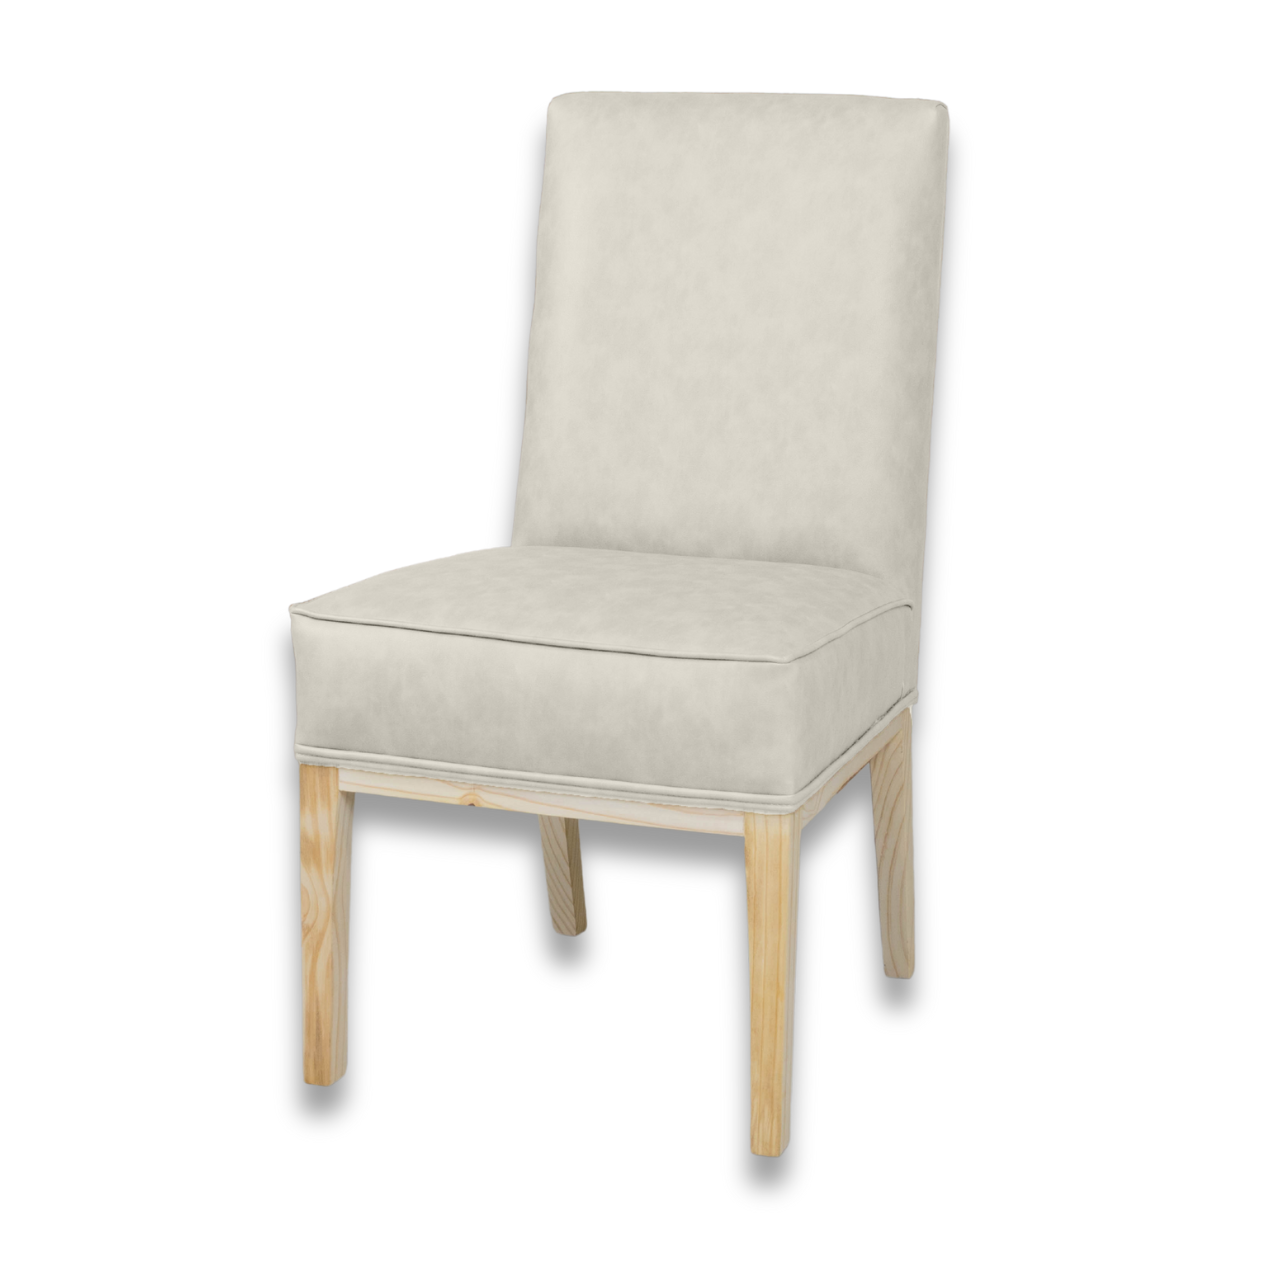 CLASSIC DINING CHAIR